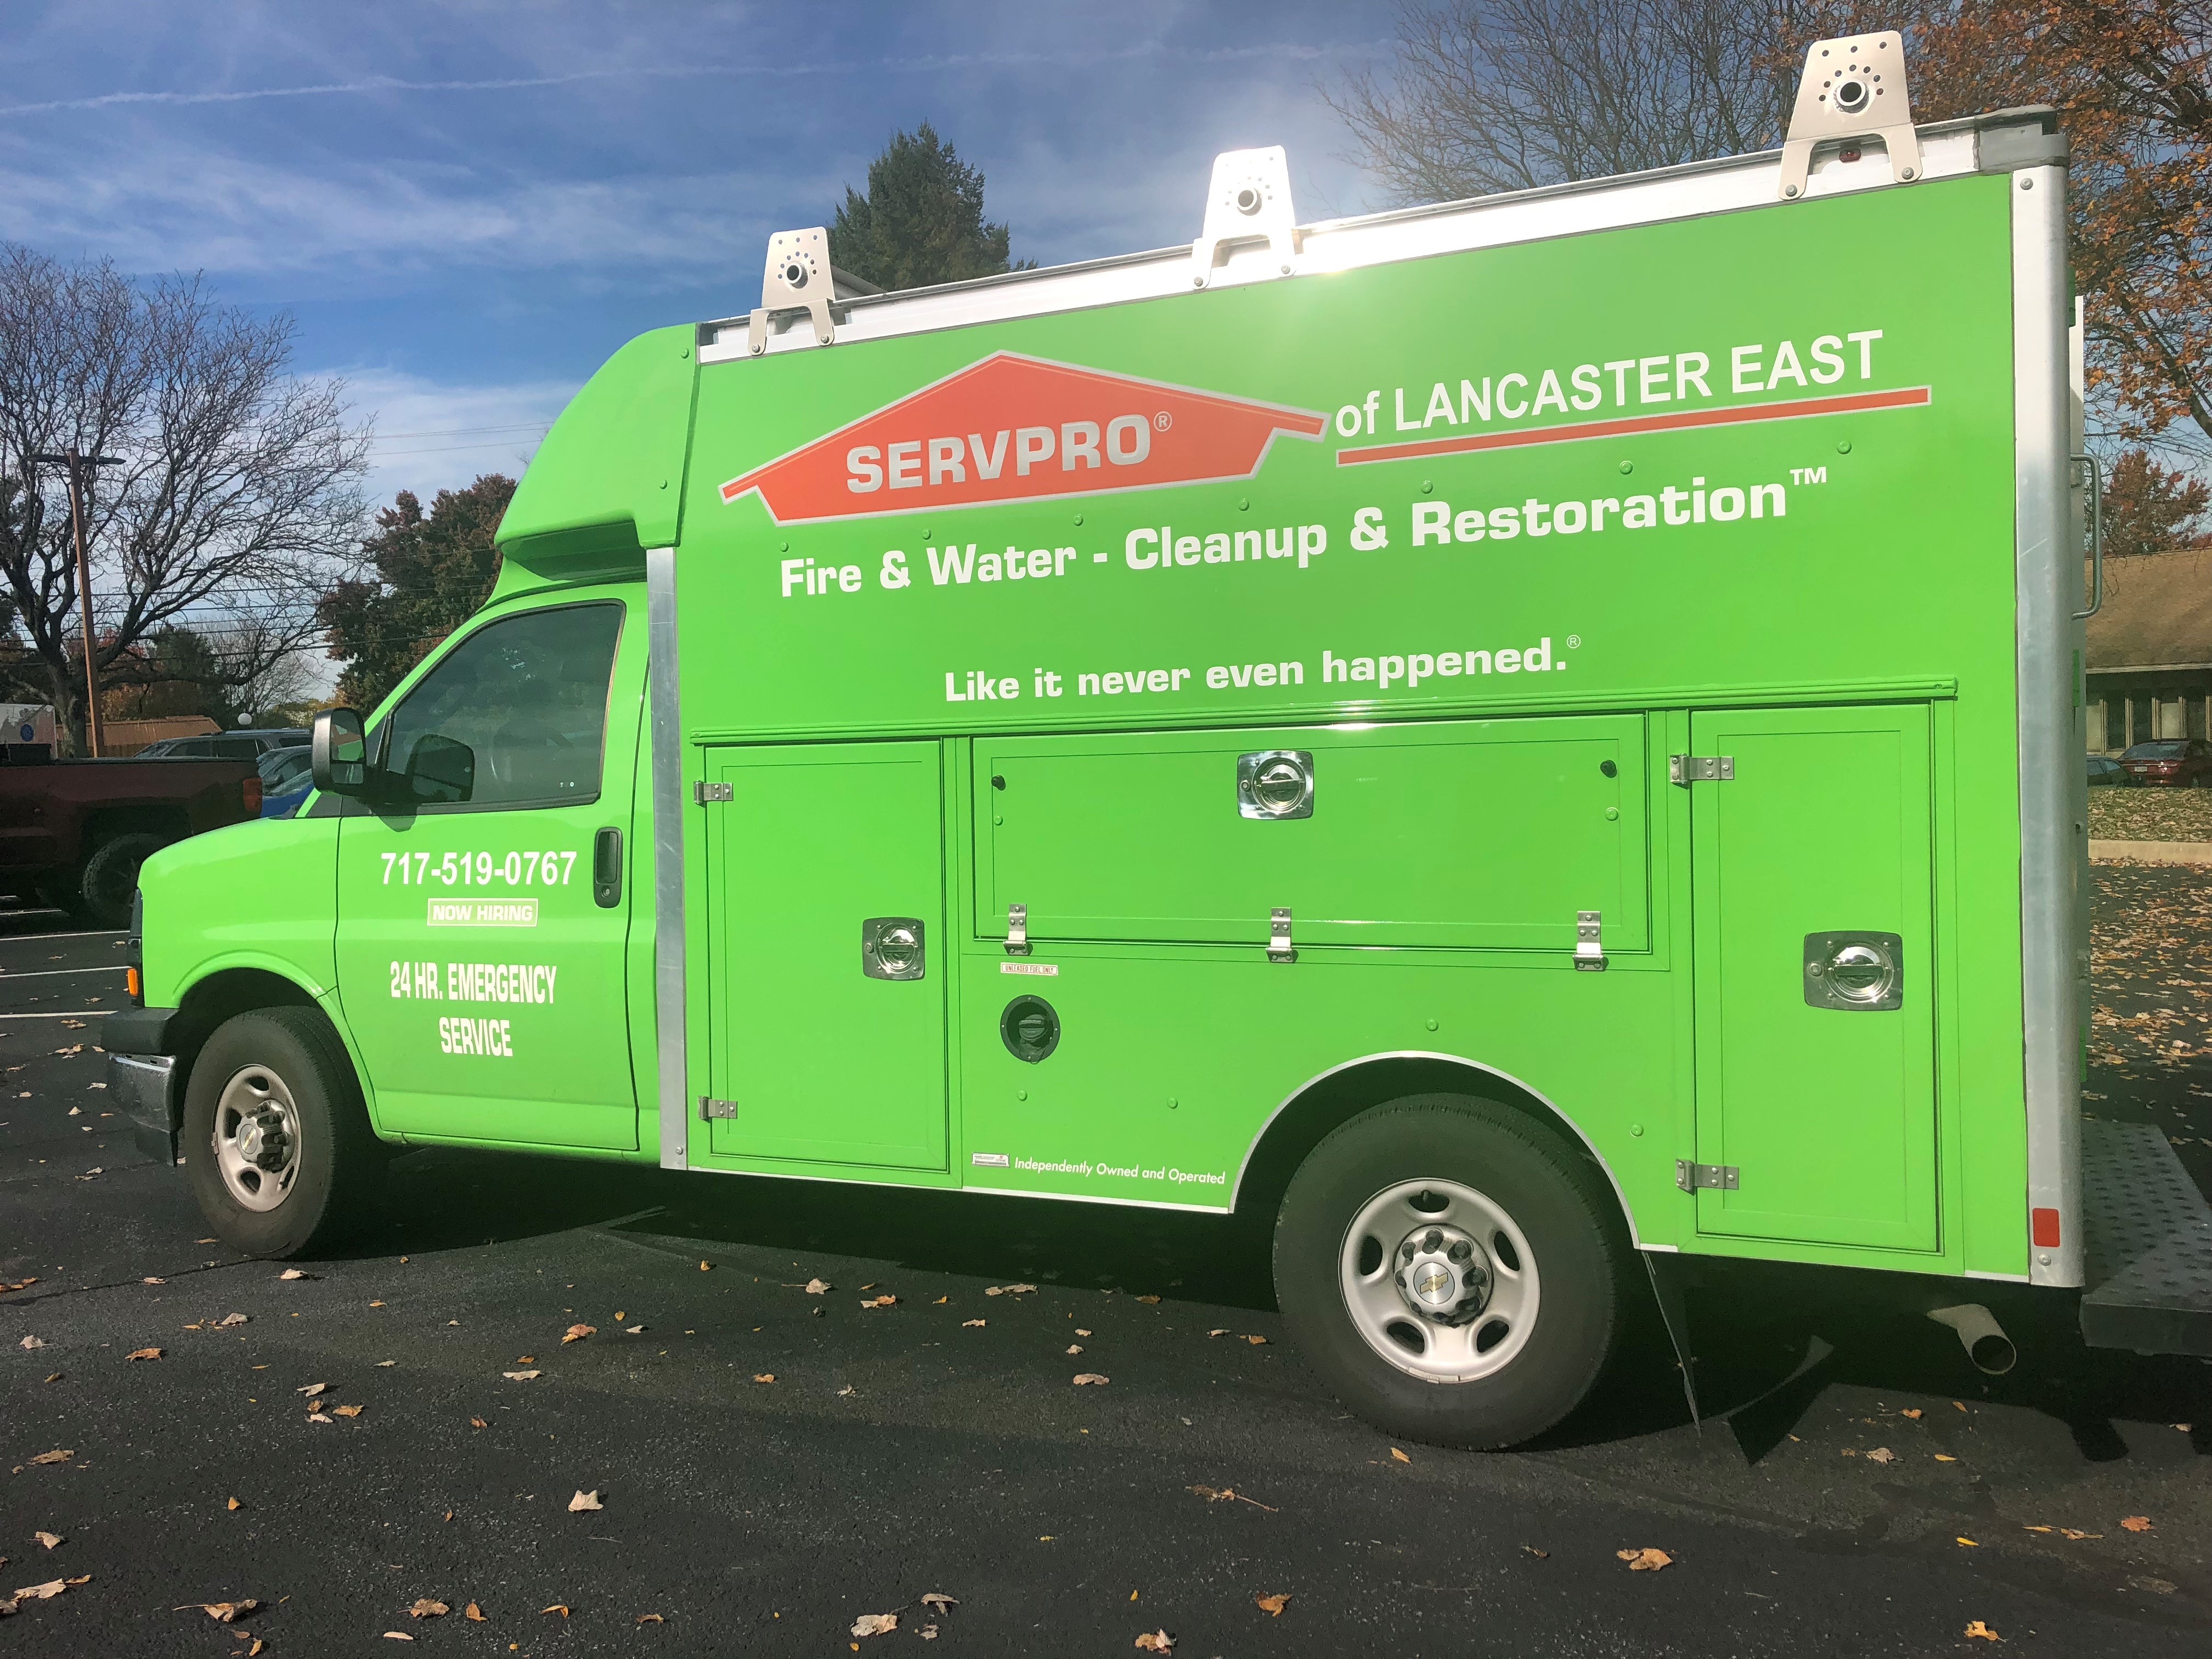 Our vehicles are equipped with all of the professional supplies and equipment needed to provide excellent service for any emergency you may have!